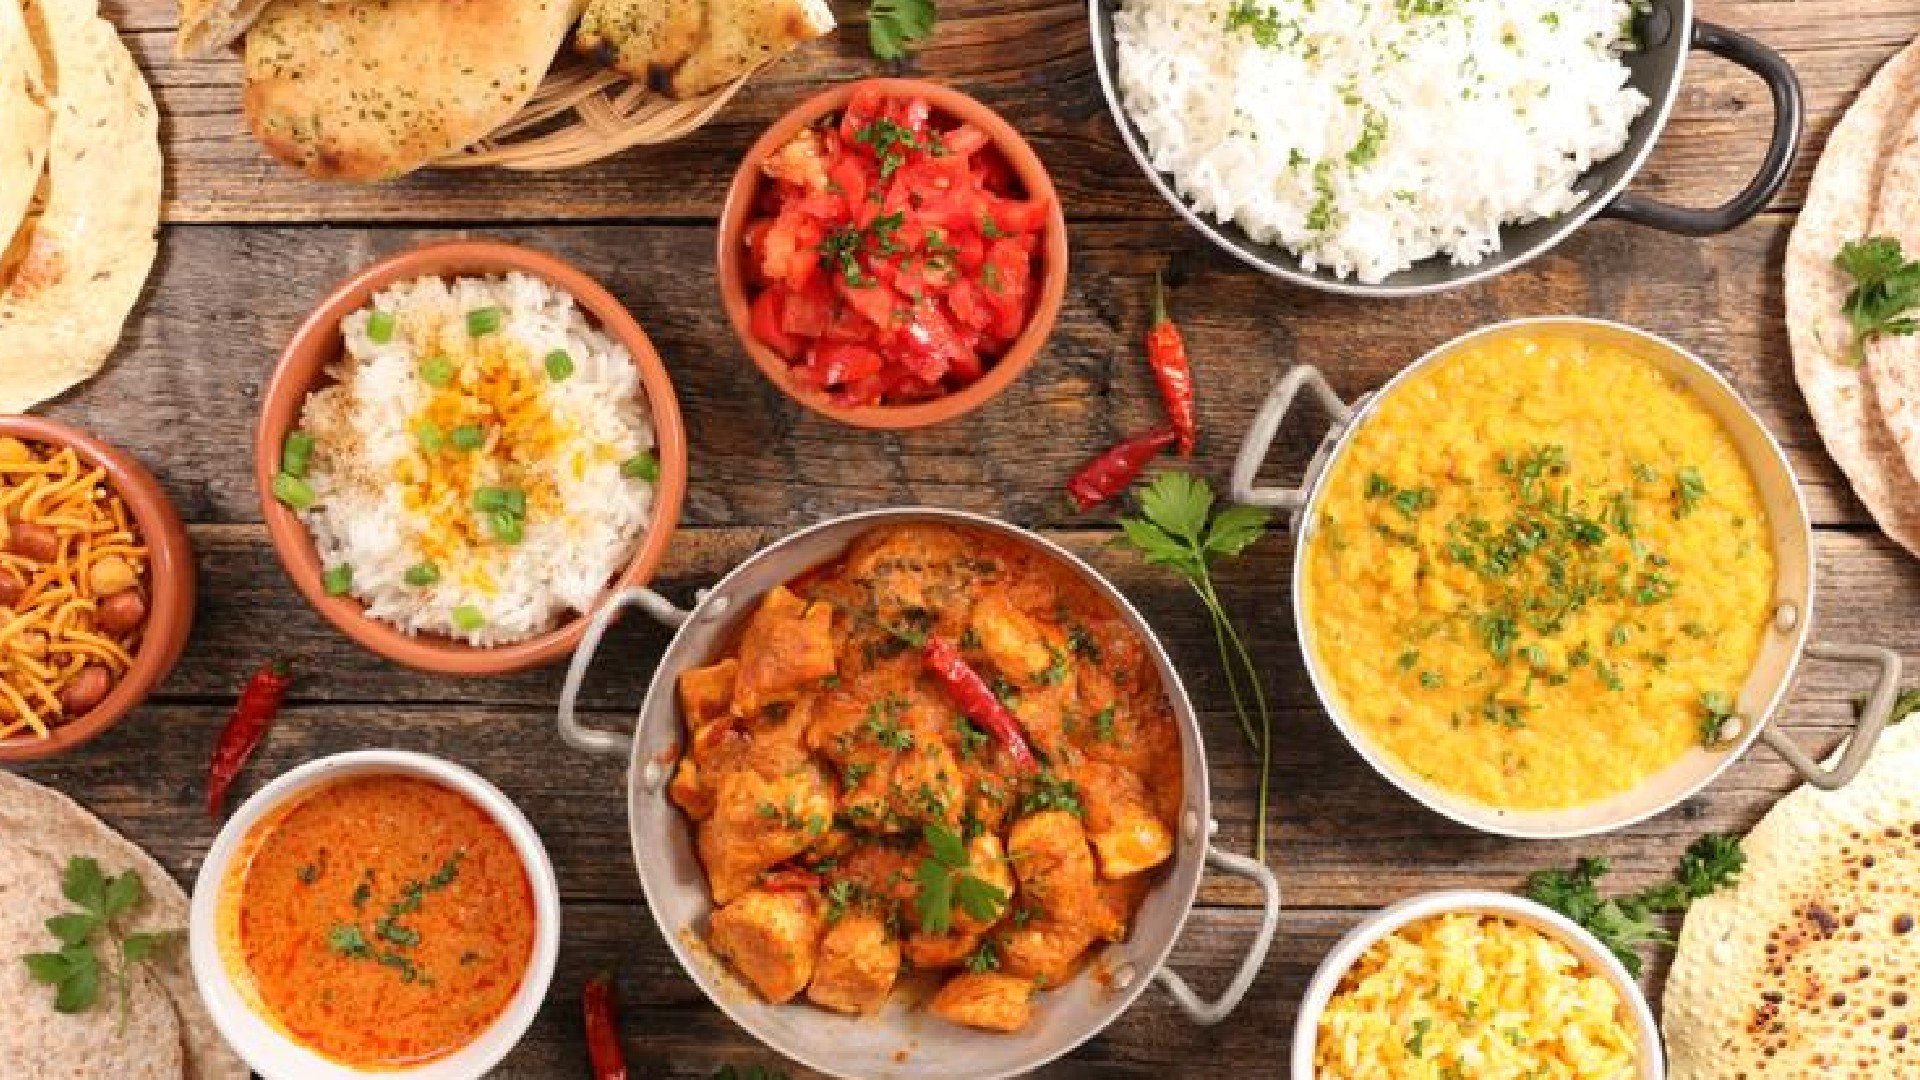 6 Garhwali & Kumaoni Delicacies You Must Try On Your Next Trip To Uttarakhand